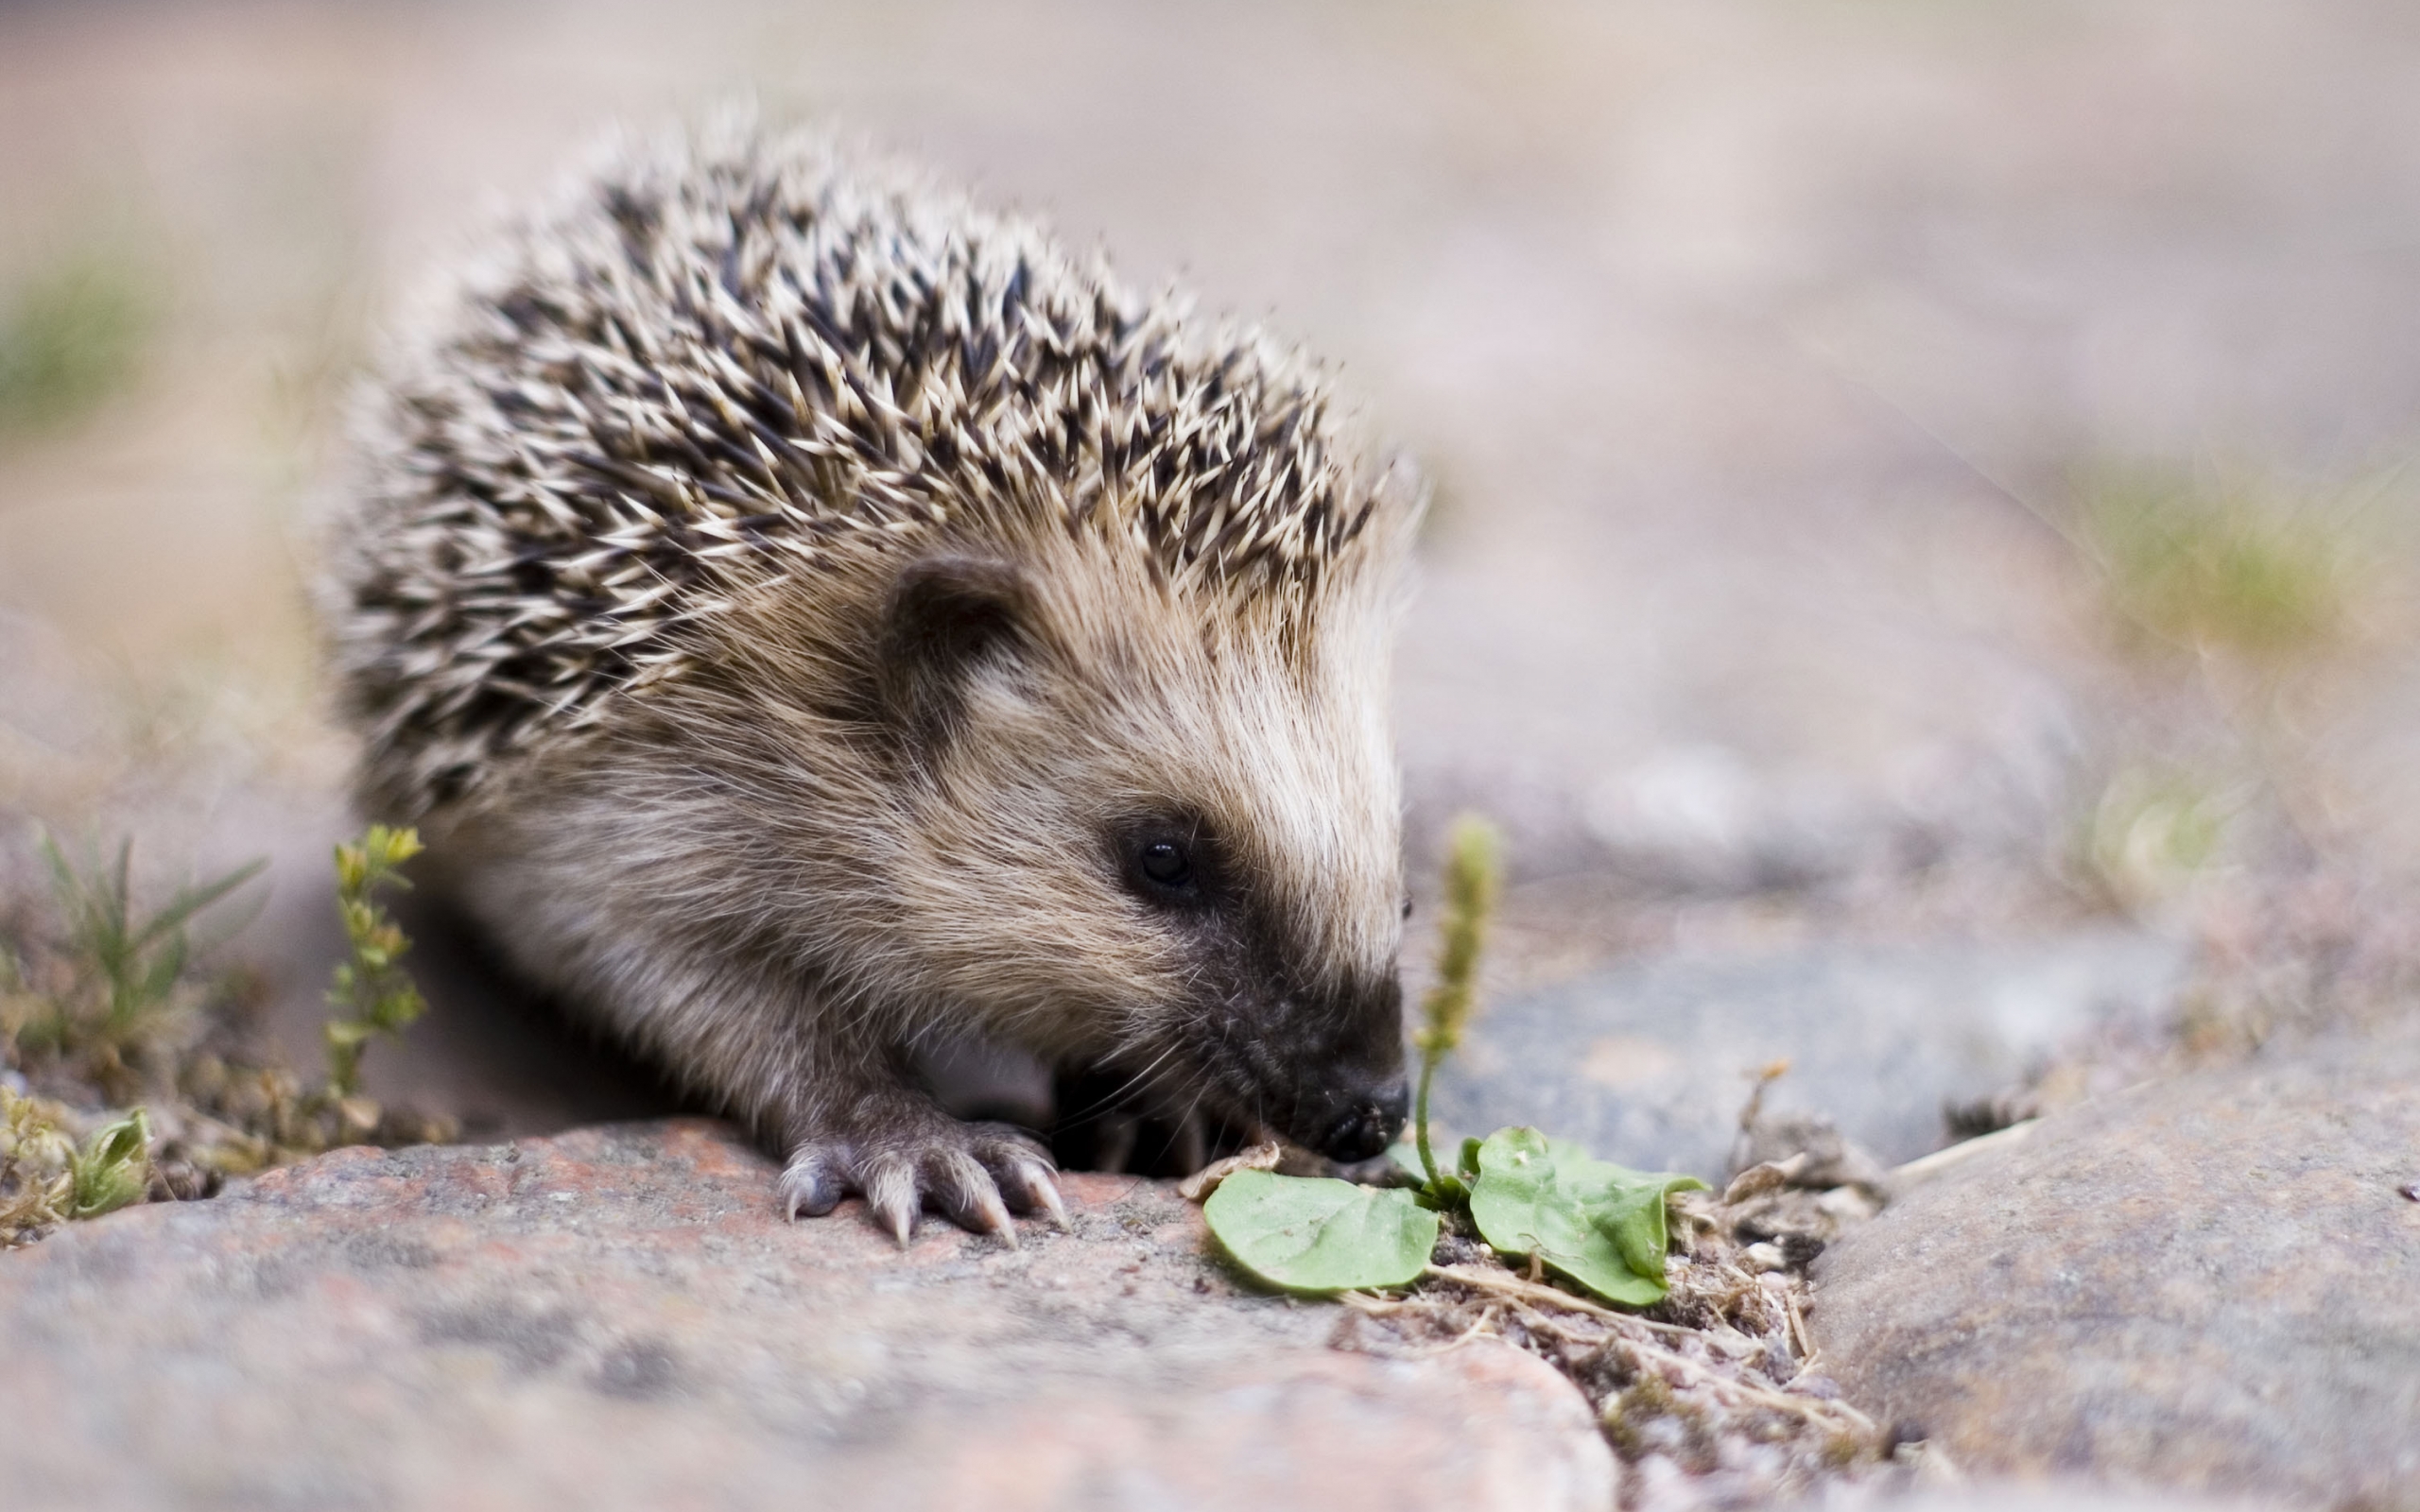 35508 download wallpaper animals, hedgehogs, gray screensavers and pictures for free